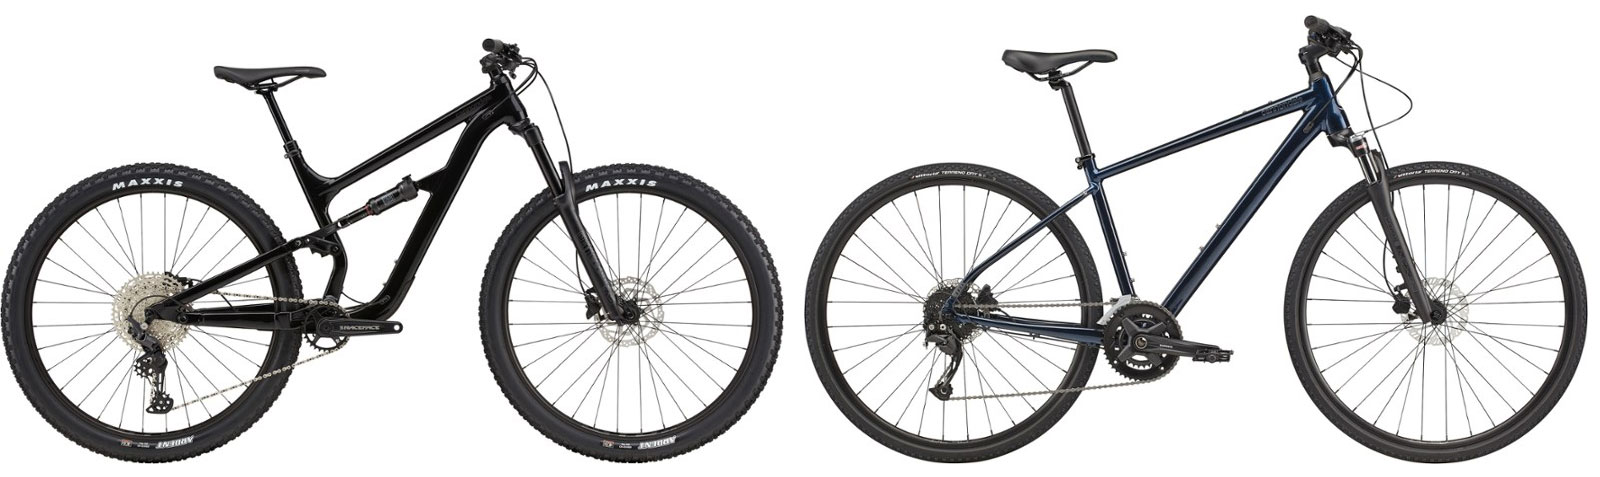 Frame differences between hybrid bikes and mountain bikes